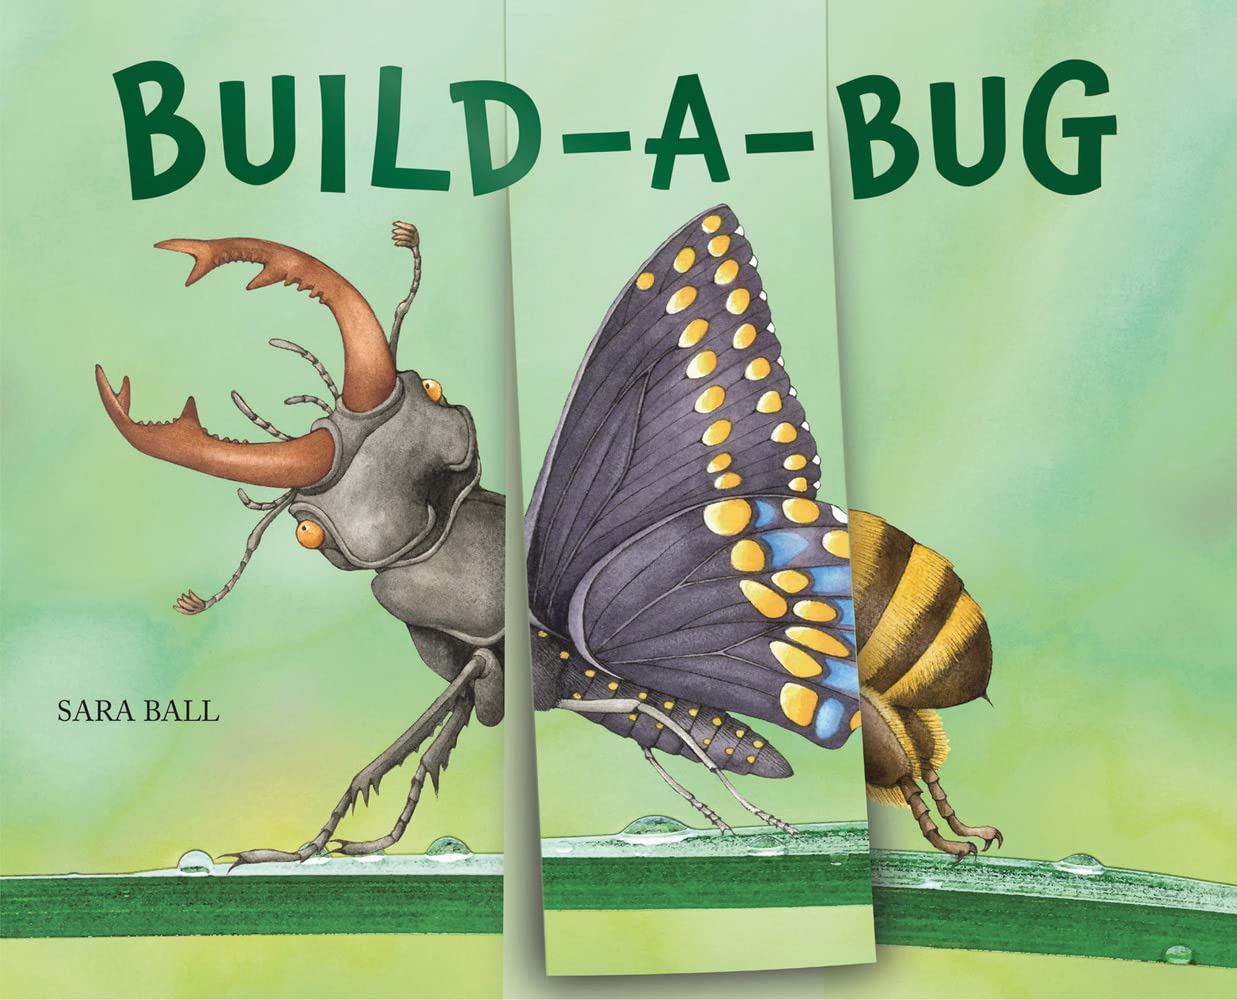 Book cover with illustrated bugs on the cover